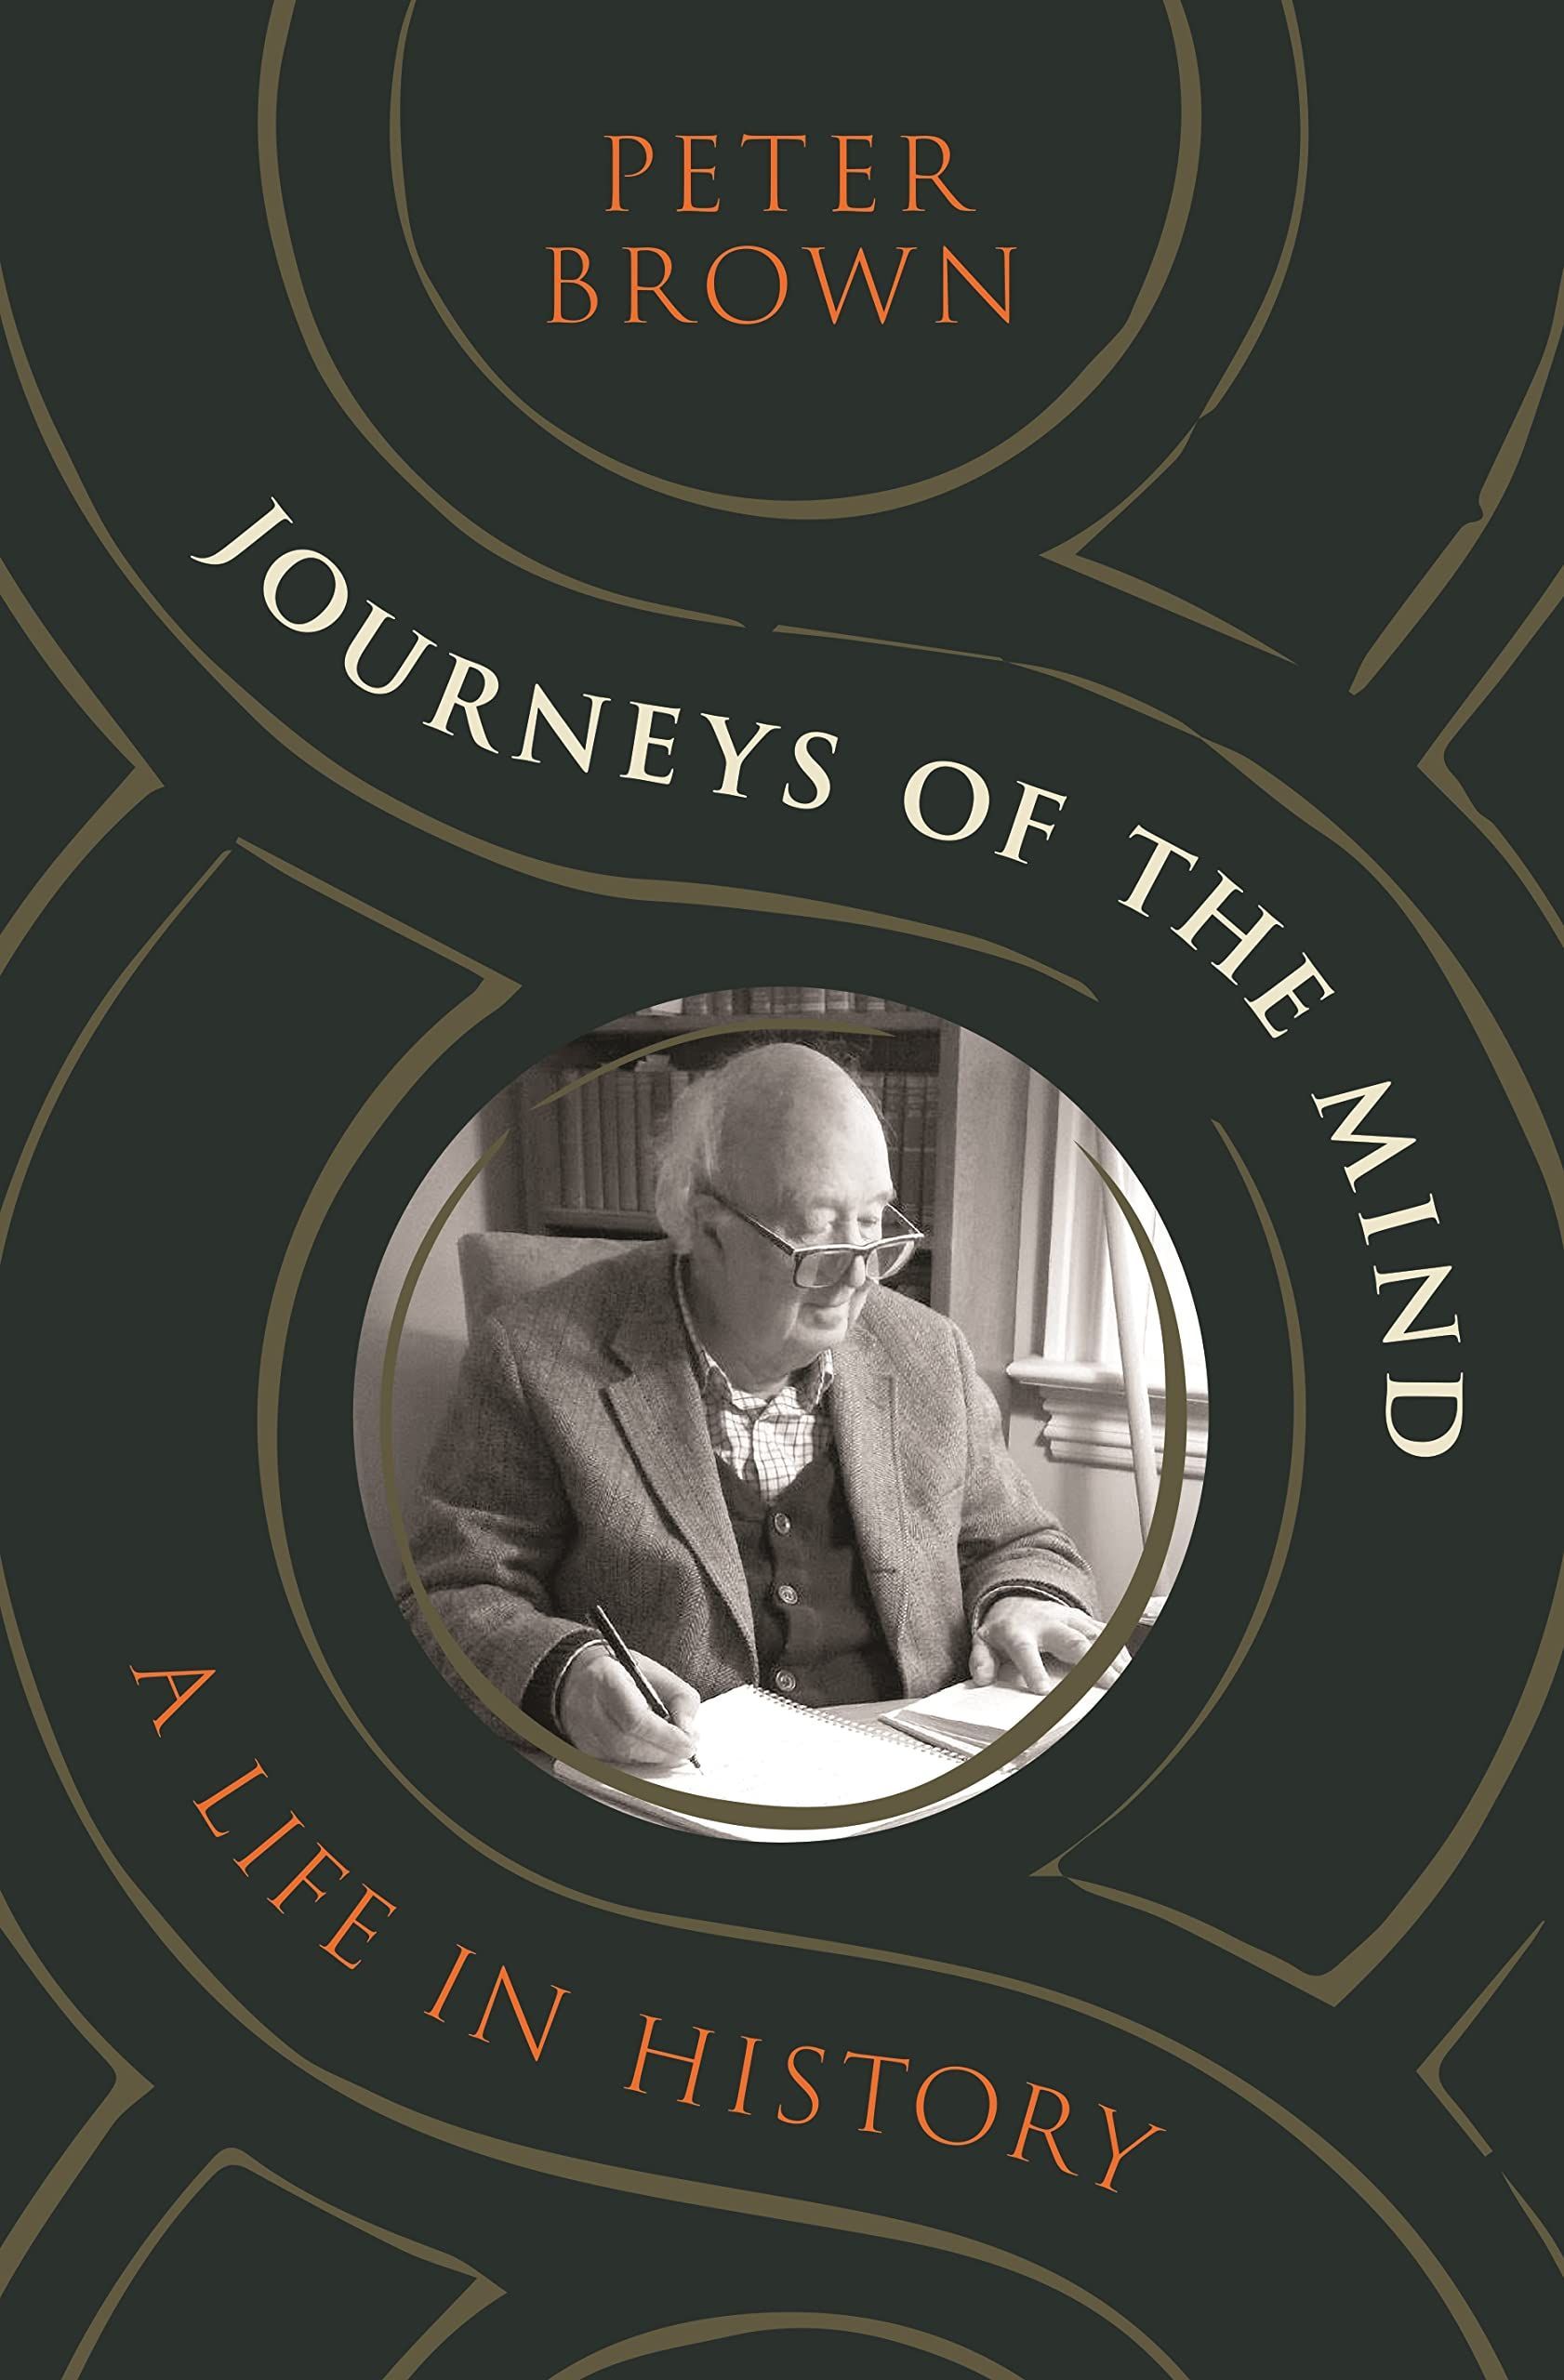 Tracing the Hard Edges of Religion: On Peter Brown’s “Journeys of the Mind”